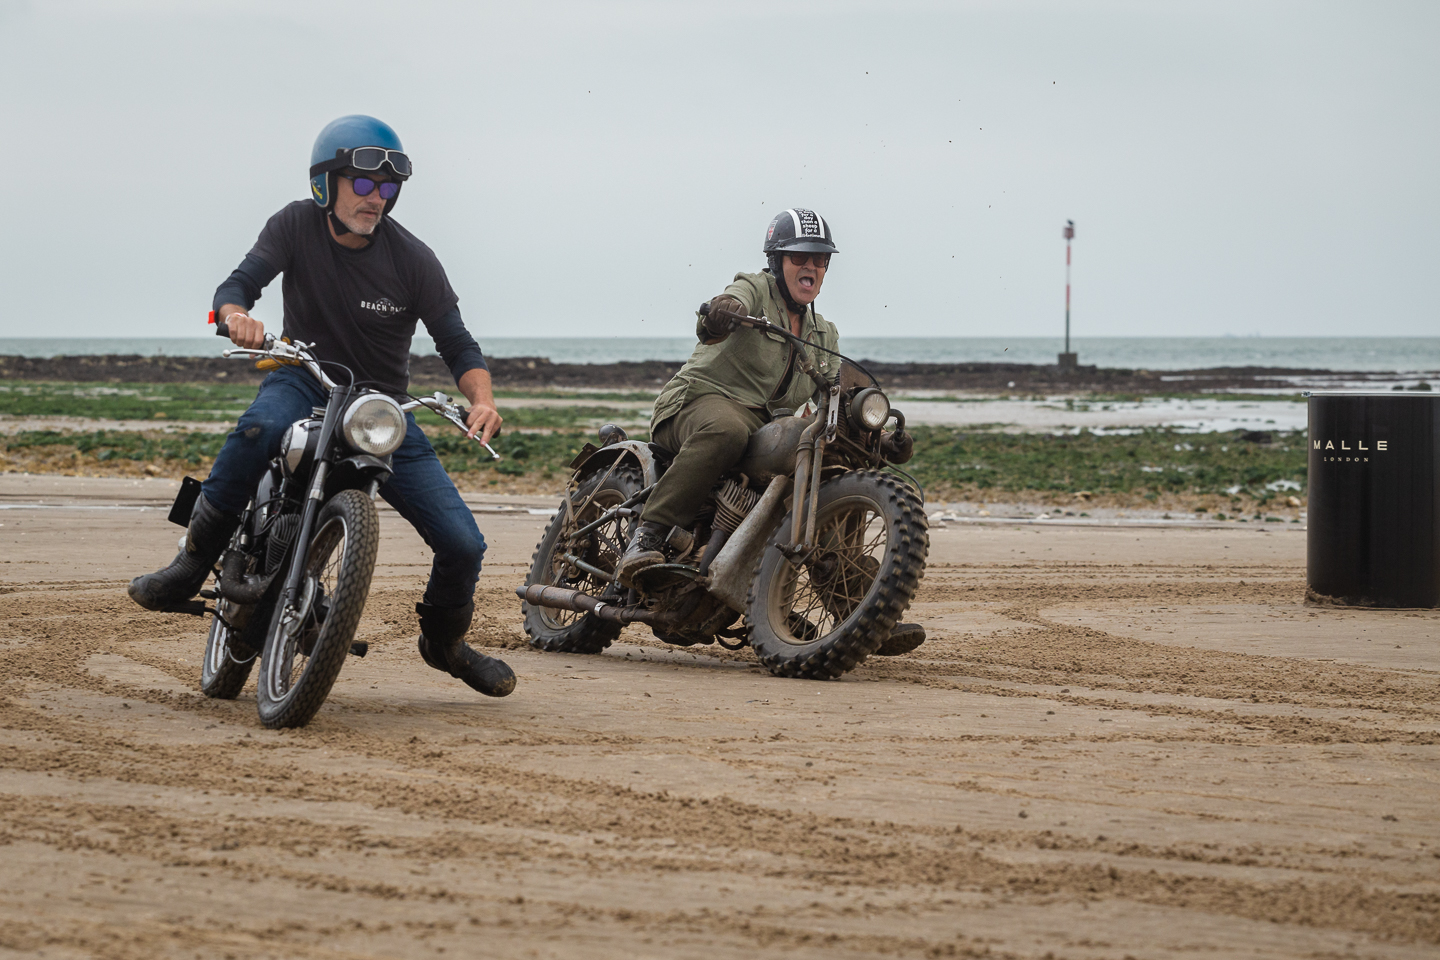 Motorcycle racers on Margate beach